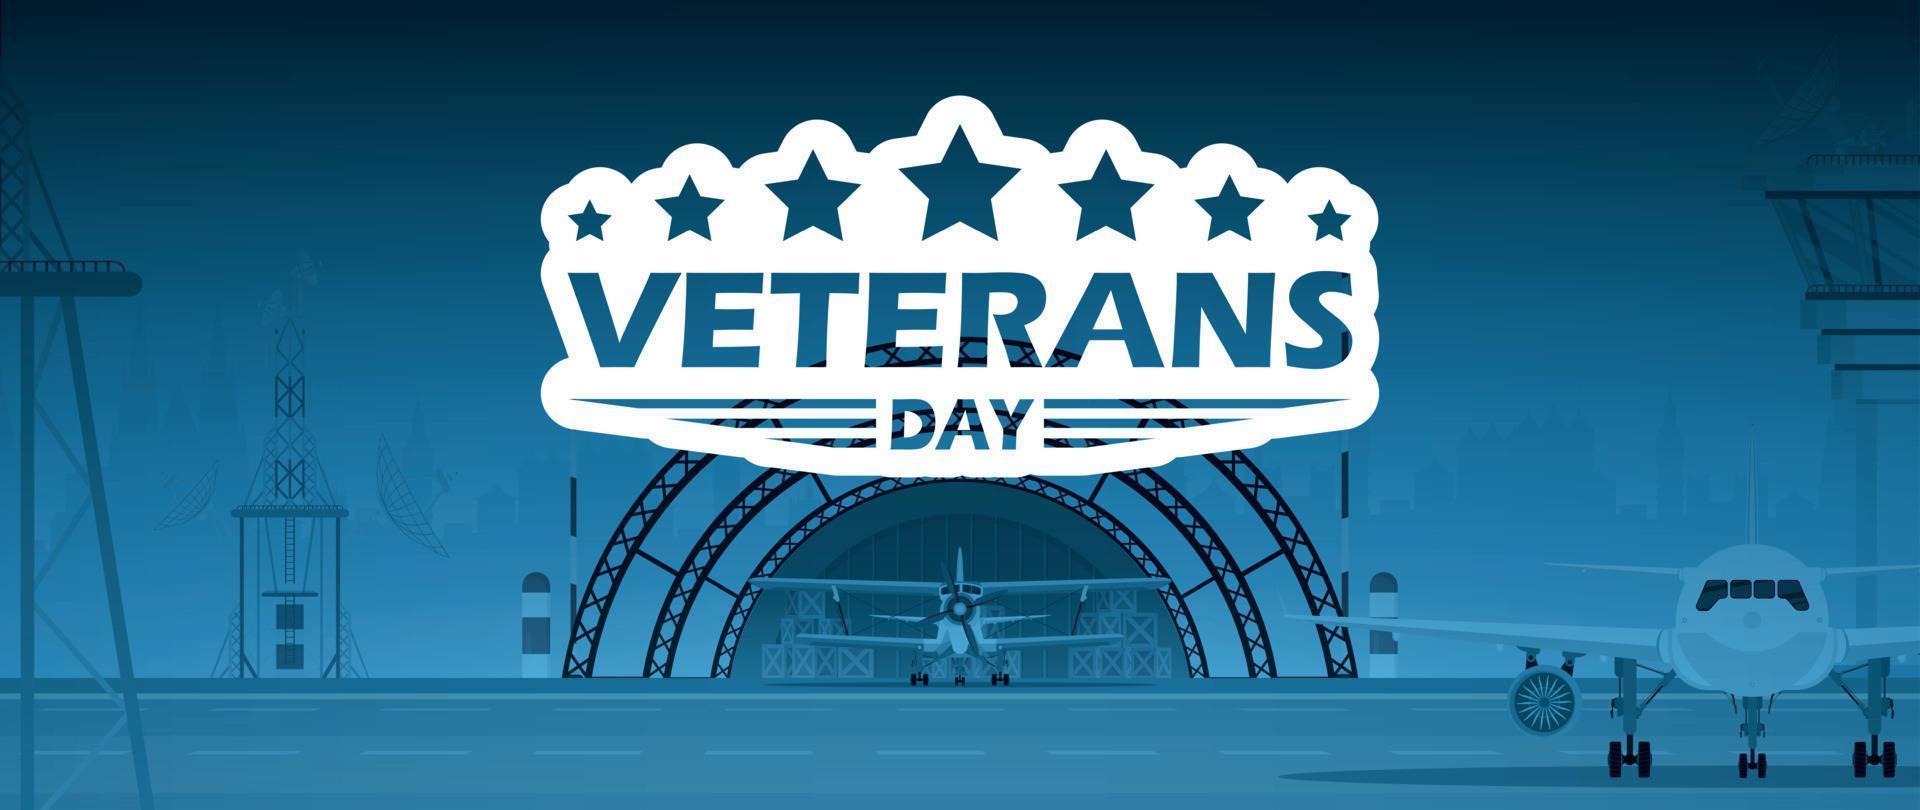 Veterans Day poster. Military airport in the background. Cartoon style. vector